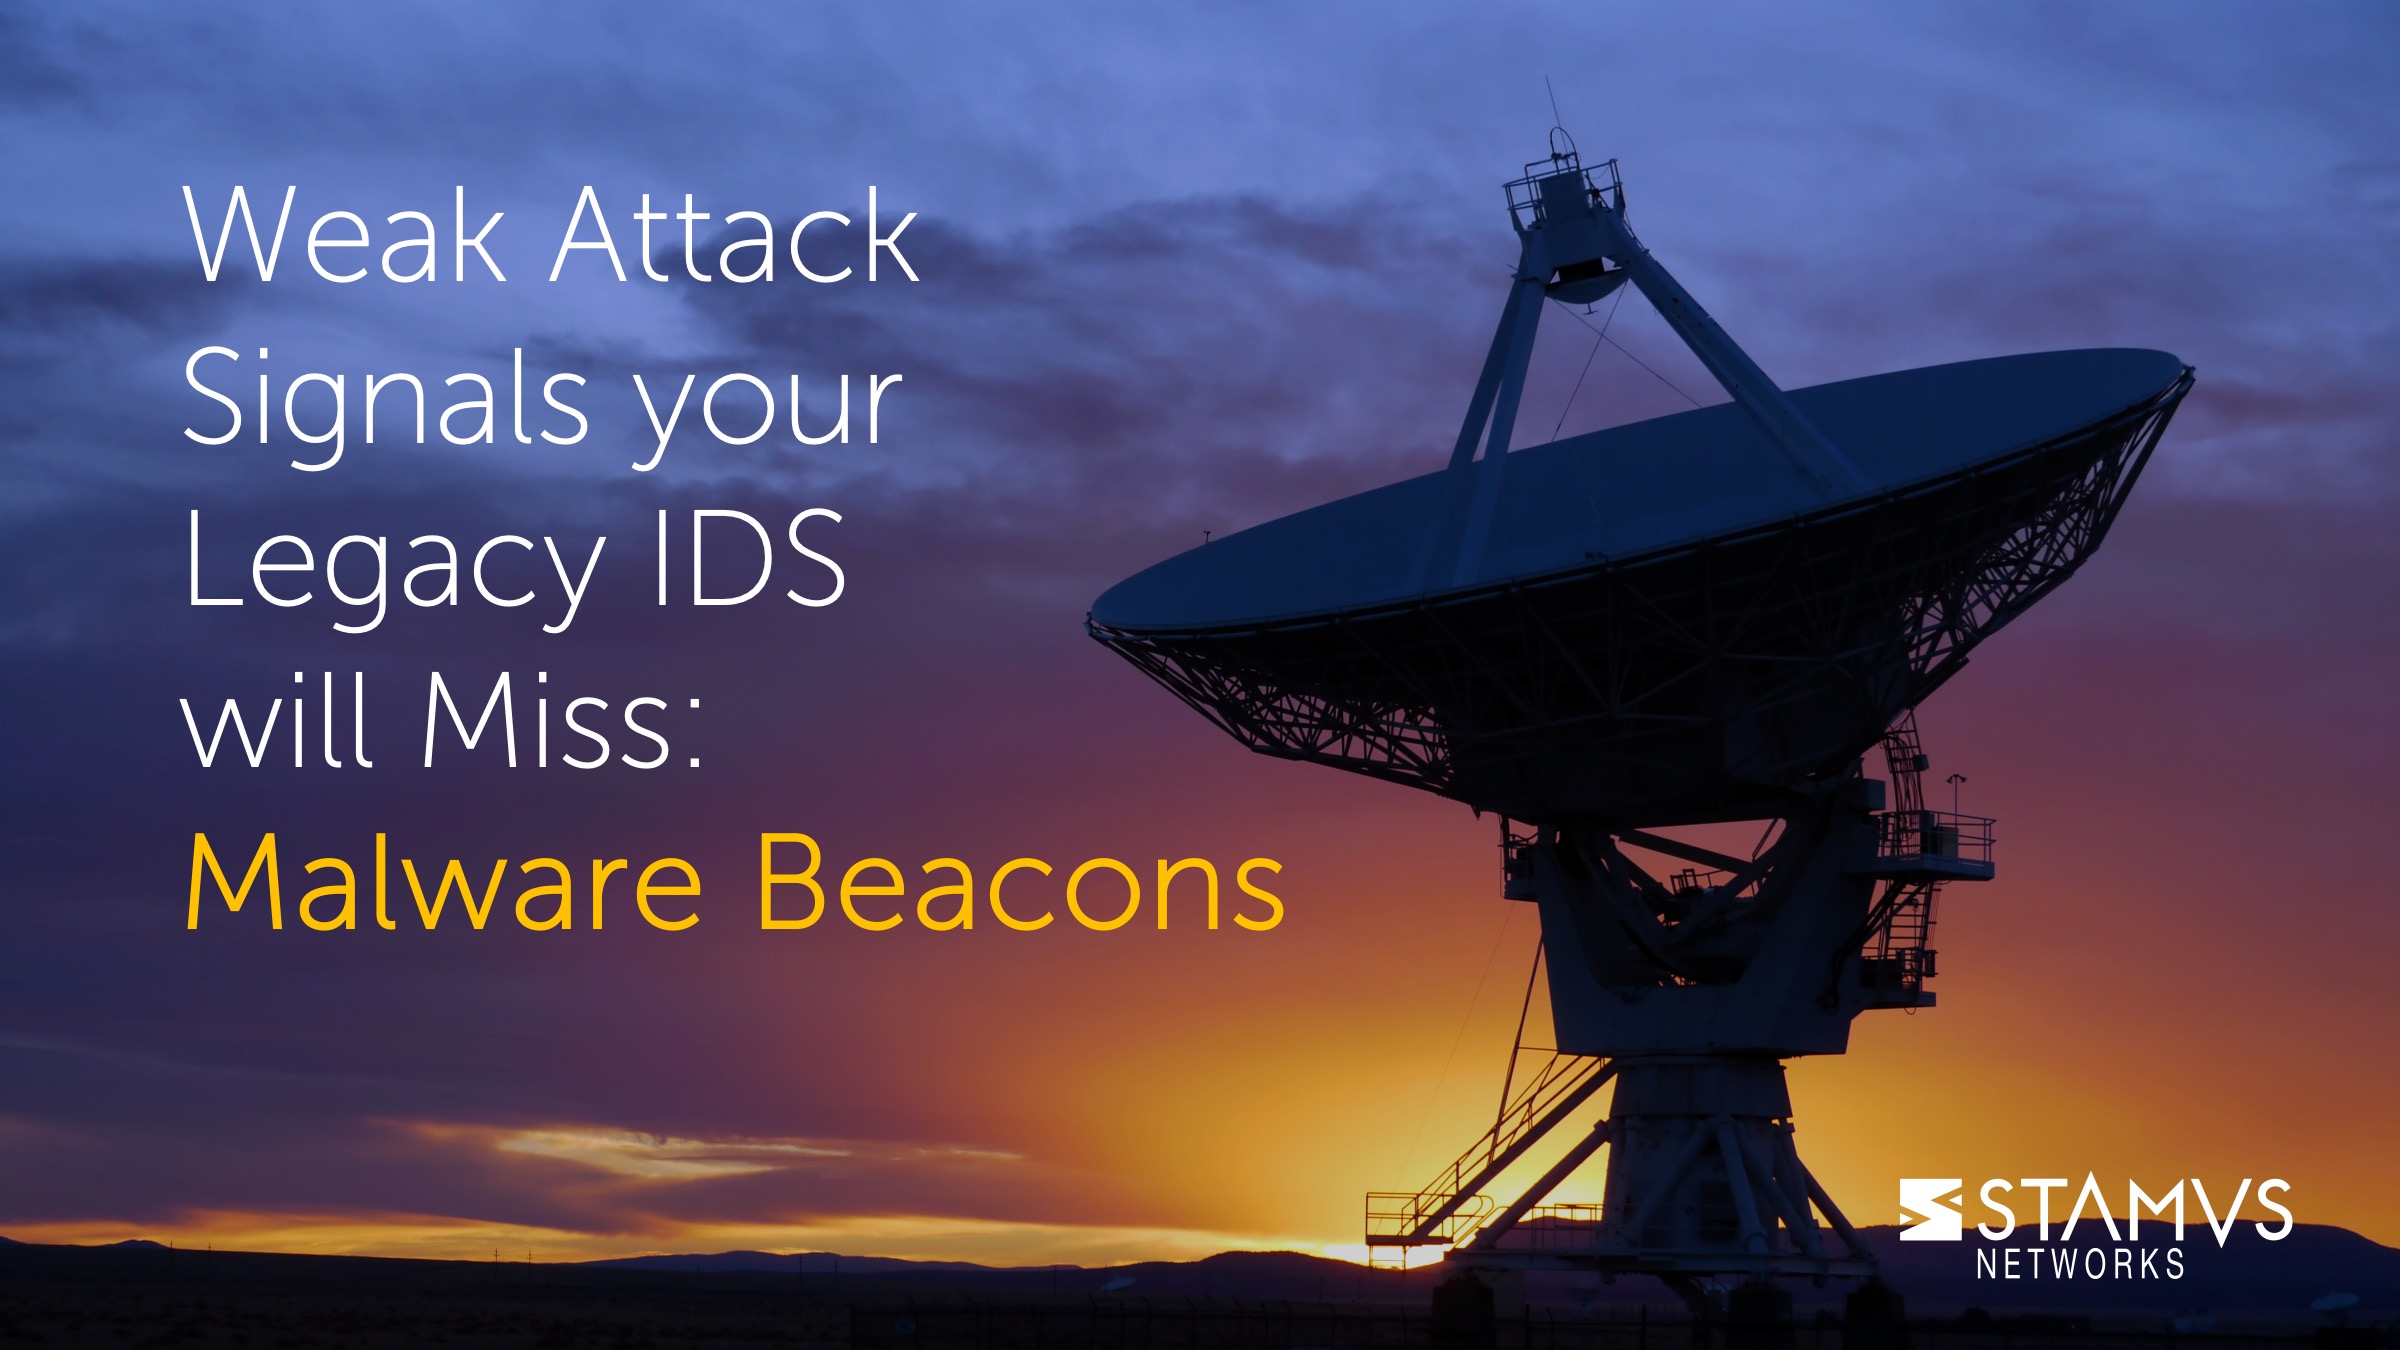 Weak Attack Signals Your Legacy IDS Will Miss: Malware Beacons by Stamus Networks Team